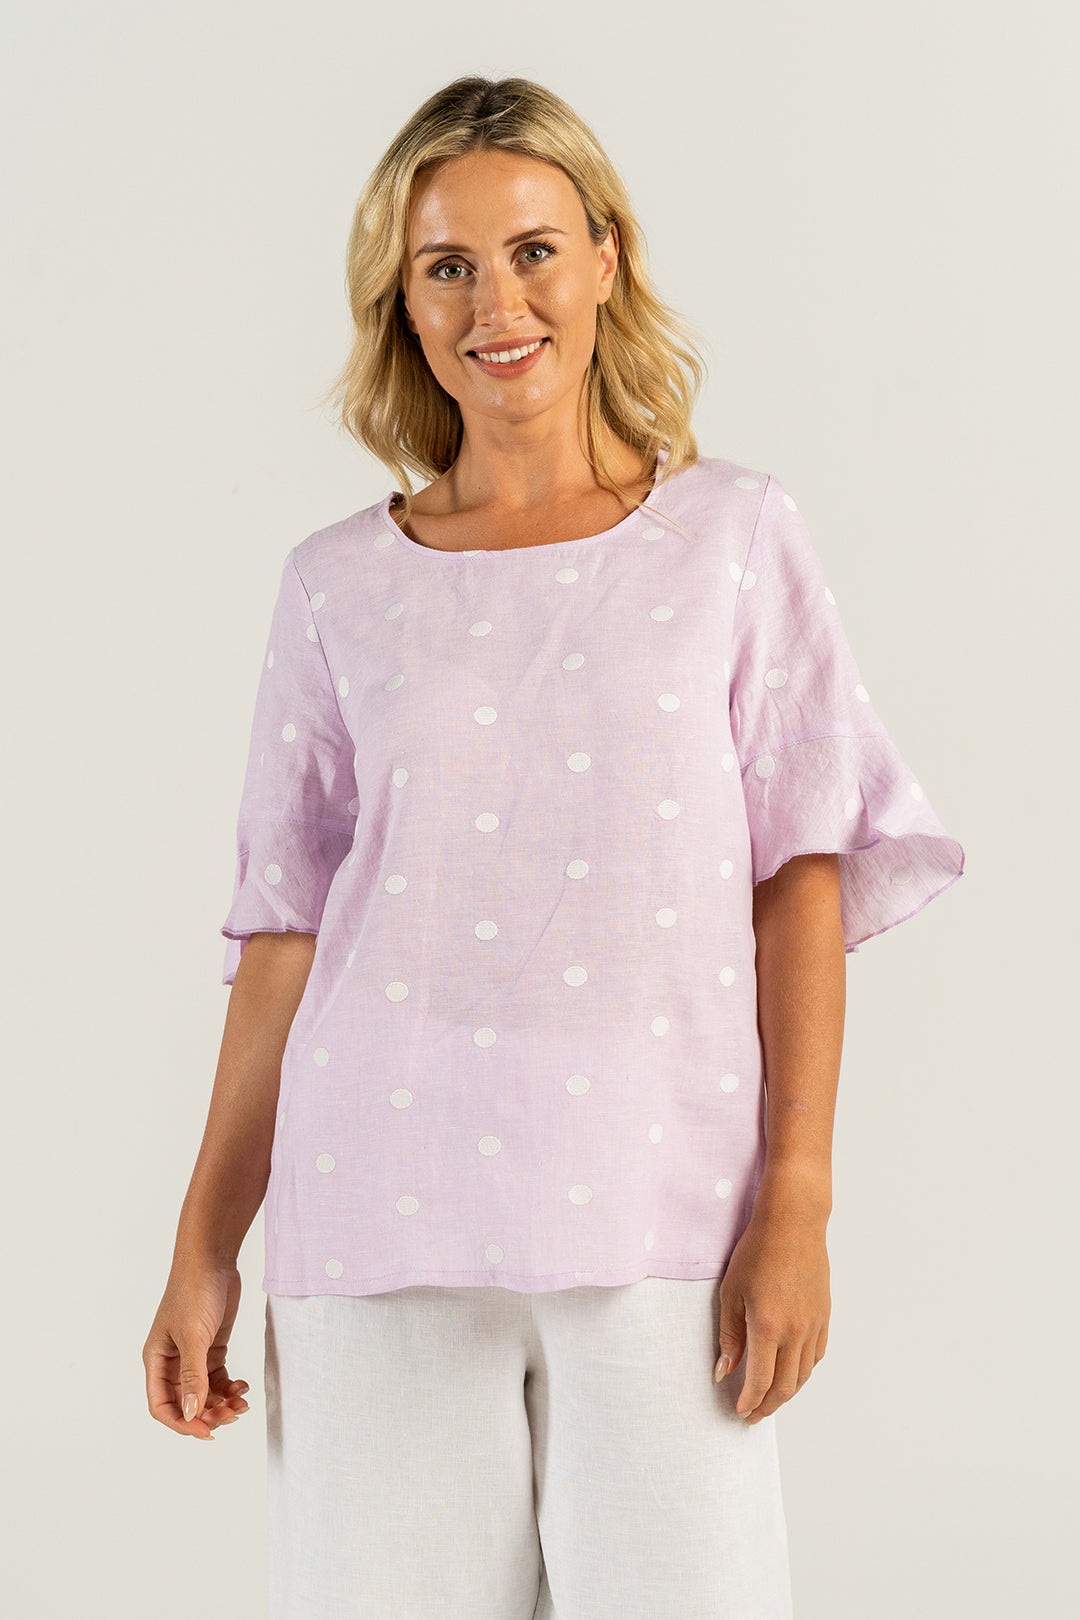 Woman wearing a linen spot flutter shirt by See saw clothing, sold and shipped from Pizazz Boutique Nelson Bay online women's clothes shops Australia